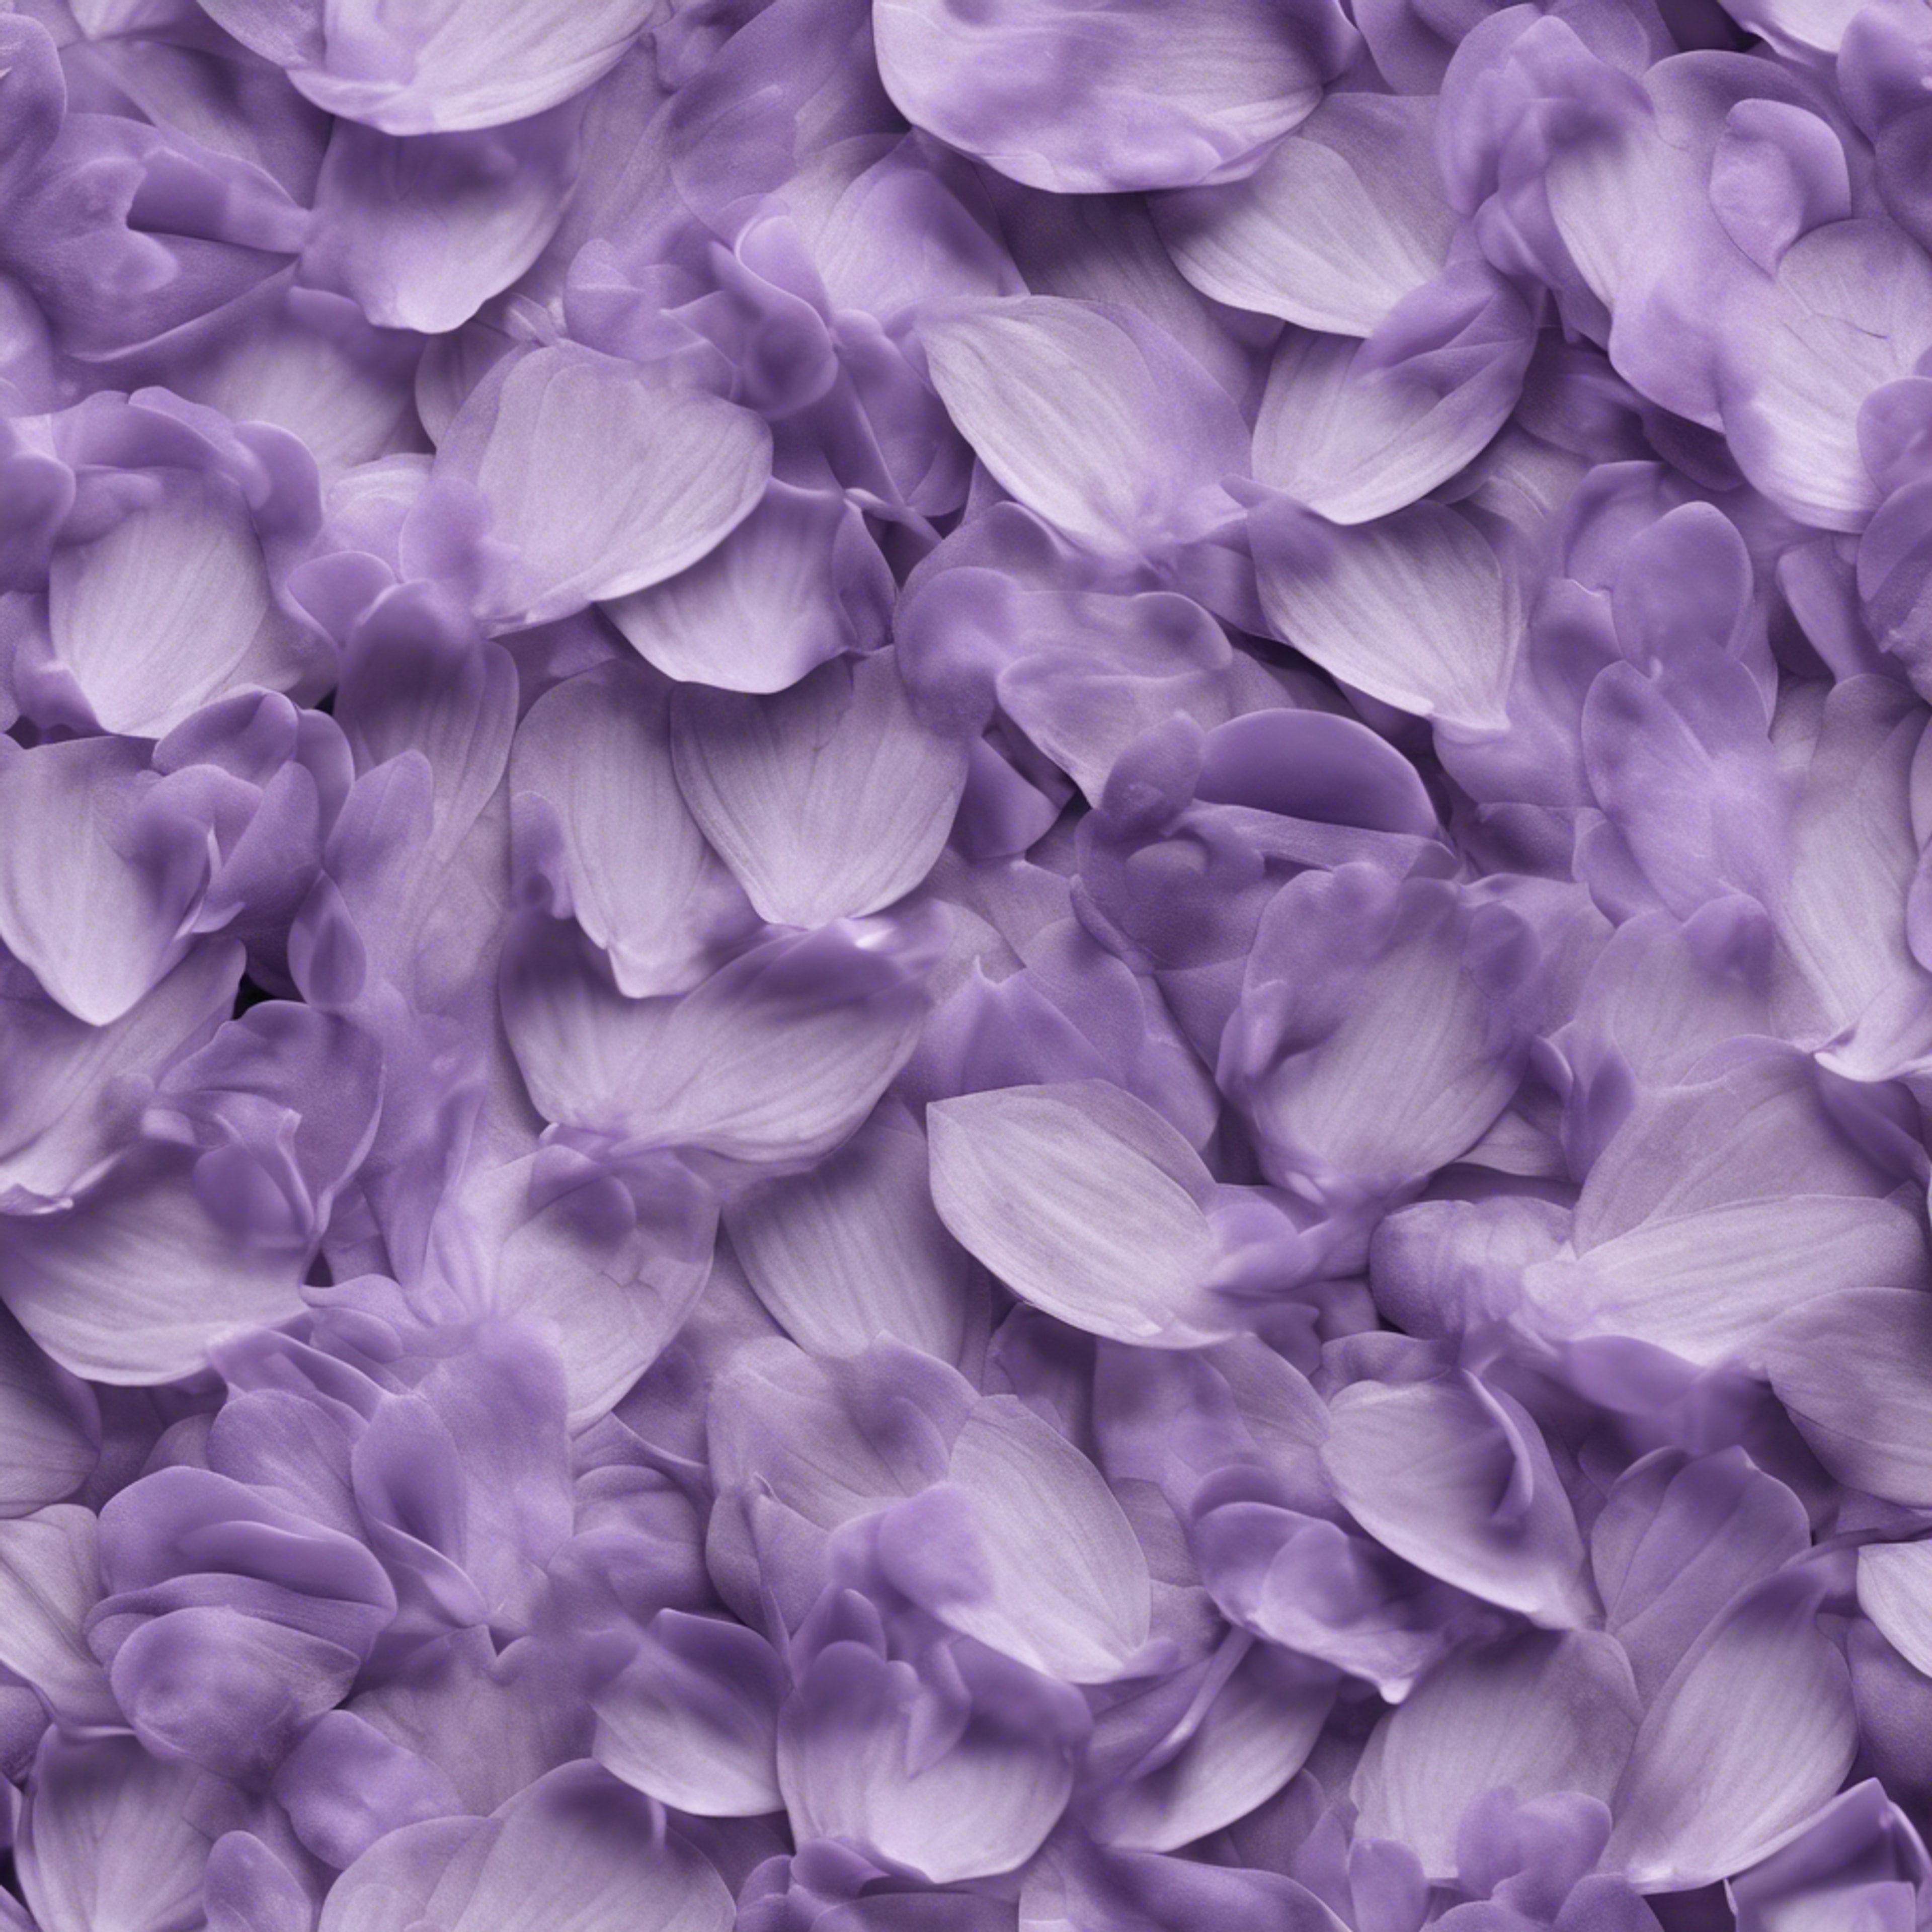 Seamless delicate pattern of layered lavender petals Taustakuva[df581ced6ed94056816b]